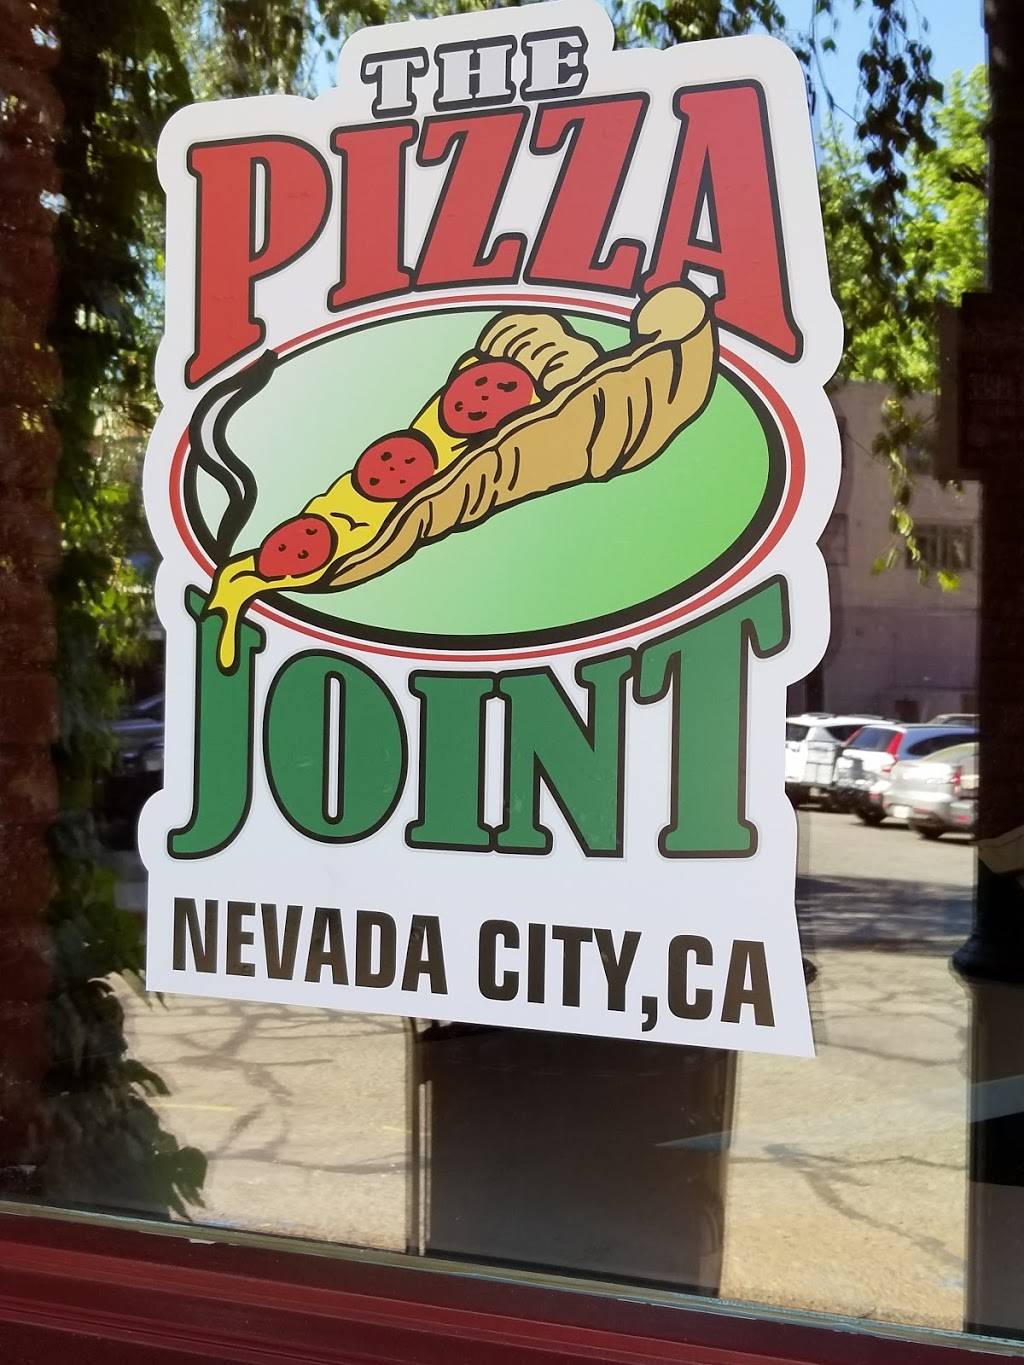 8f7def16b3e2a037b0a17d93500ee9e8  United States California Nevada County Nevada City 934263 The Pizza Jointhtm 